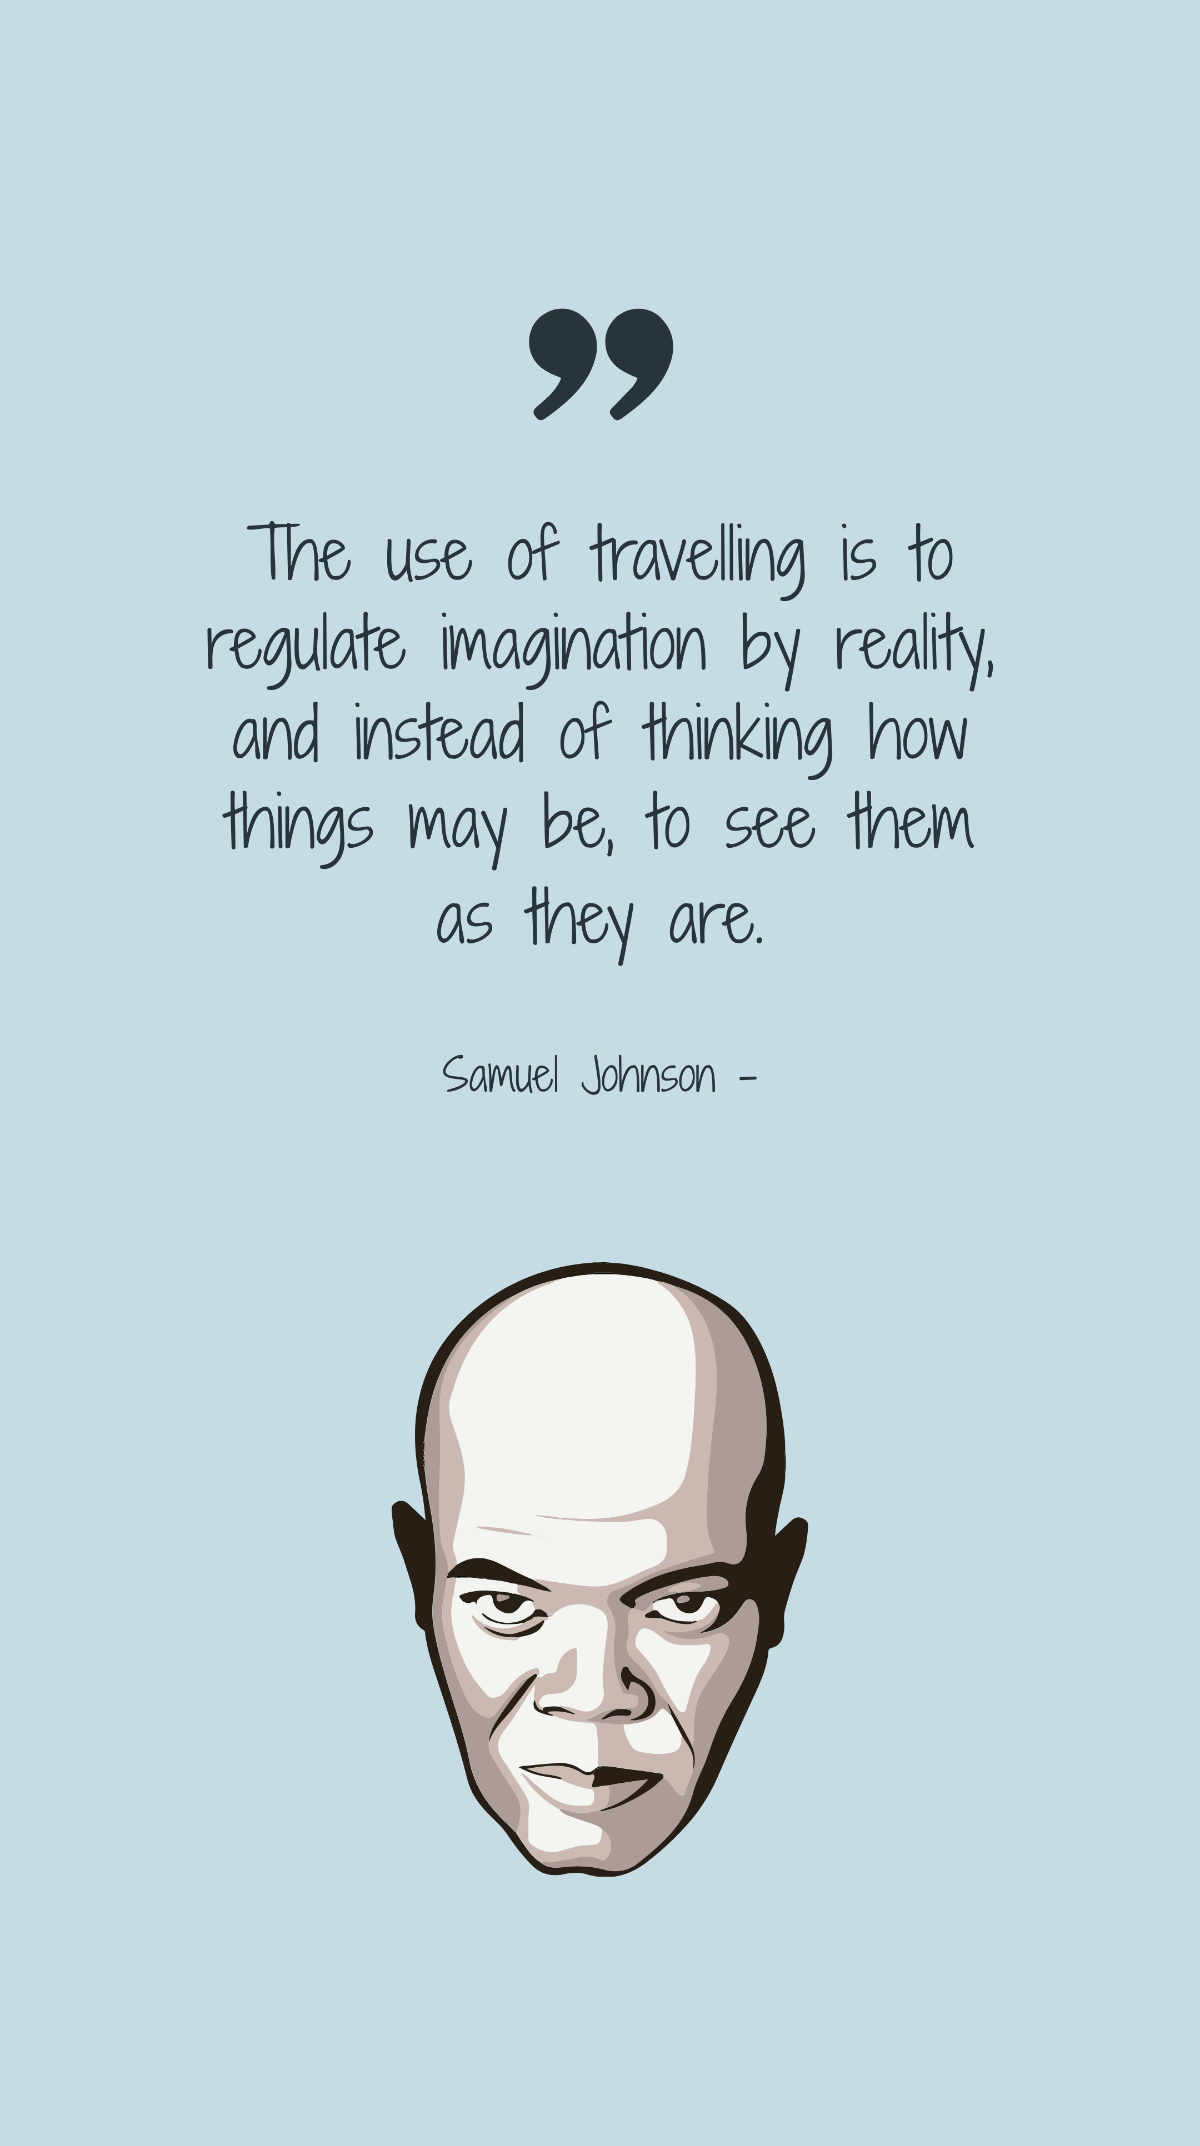 Free Samuel Johnson - The use of travelling is to regulate imagination by reality, and instead of thinking how things may be, to see them as they are. Template